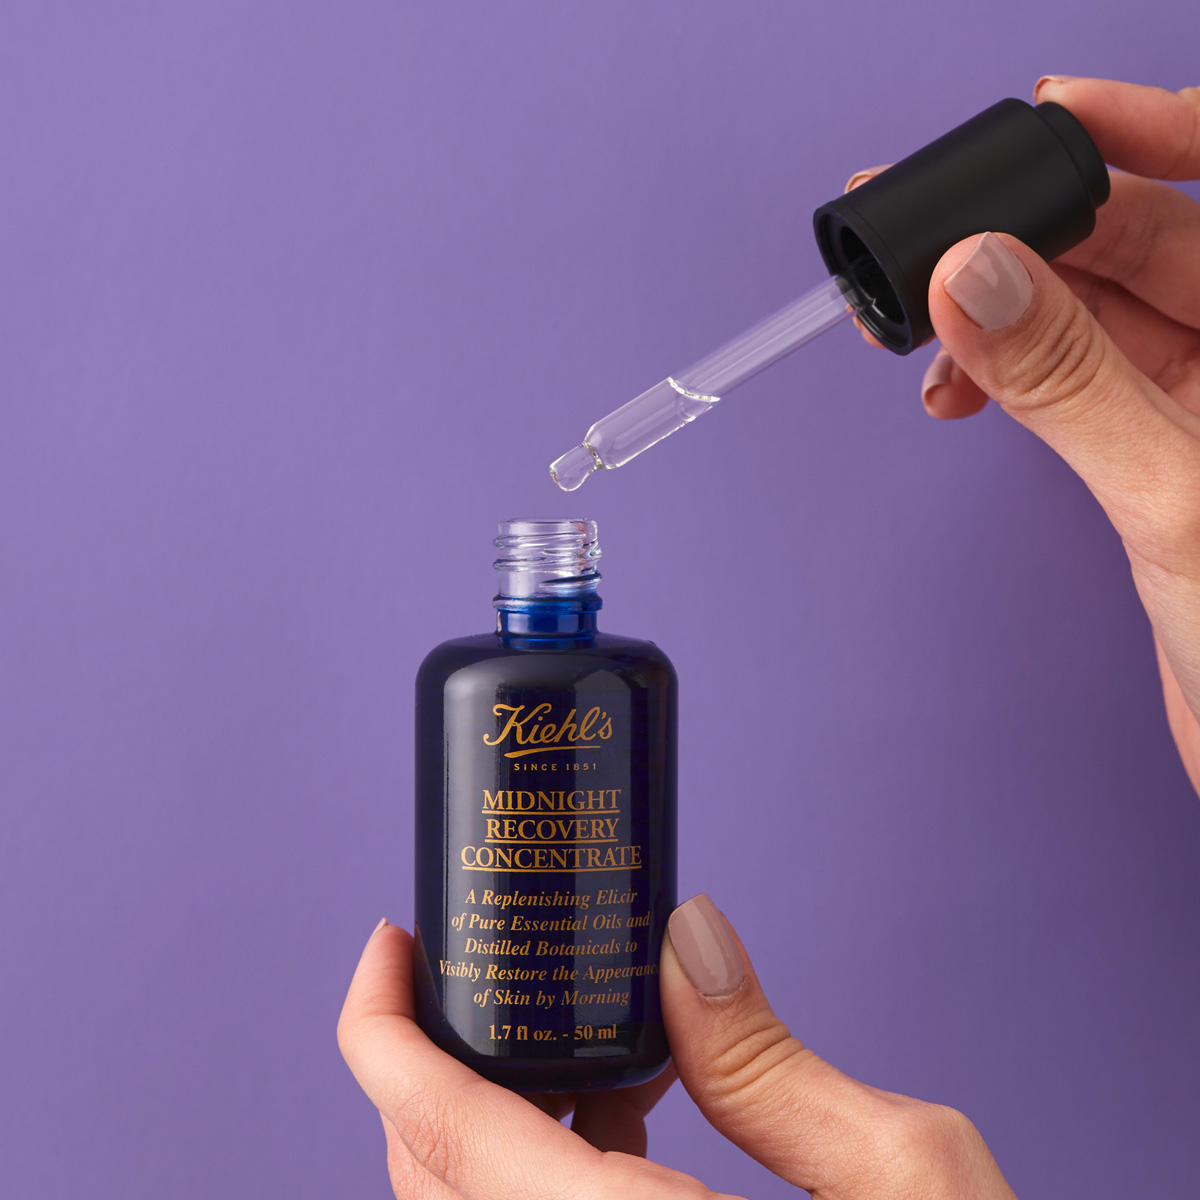 Kiehl's Midnight Recovery Concentrate 15 ml - 3